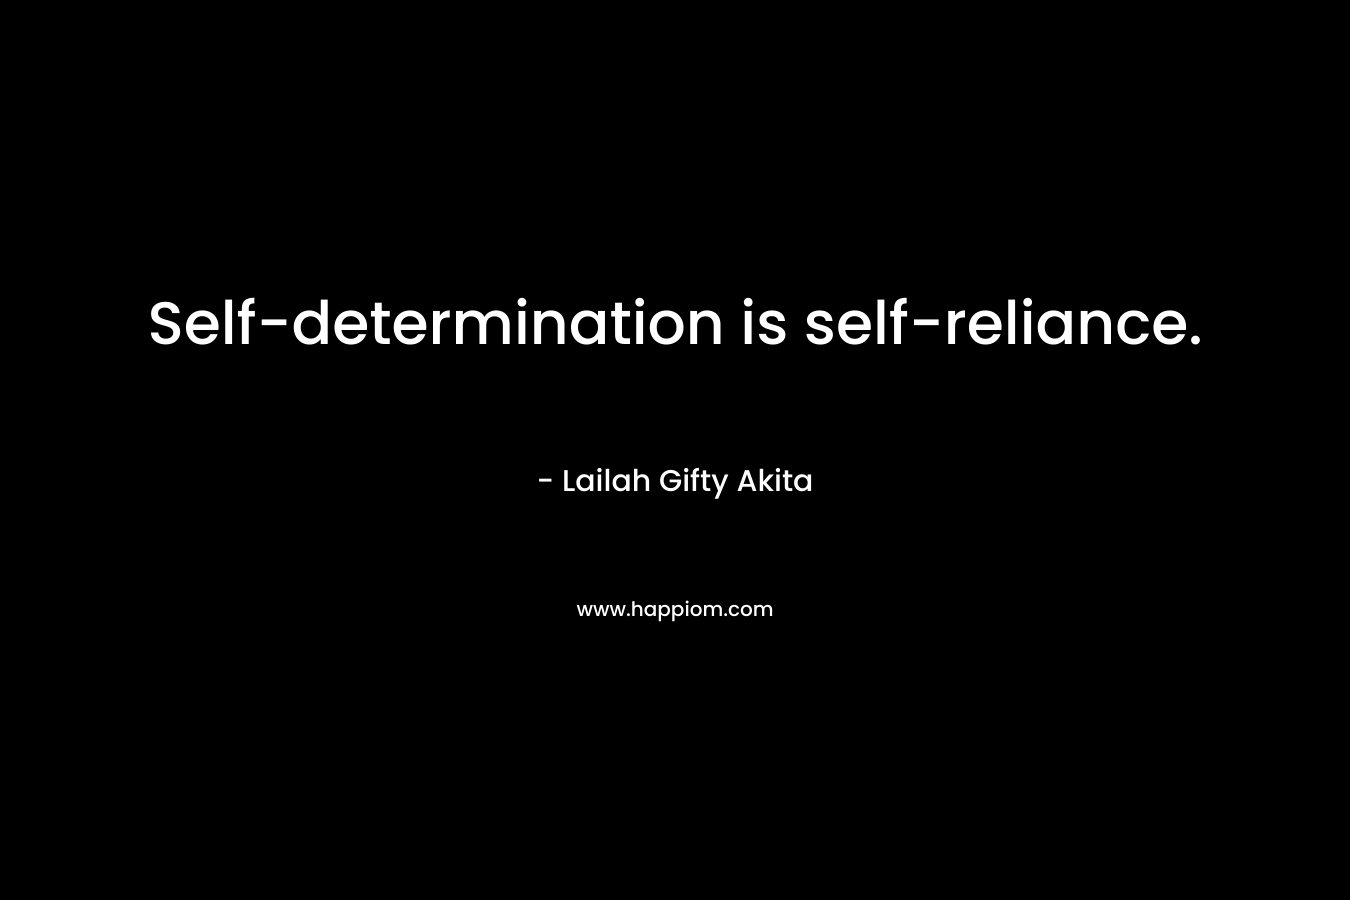 Self-determination is self-reliance.